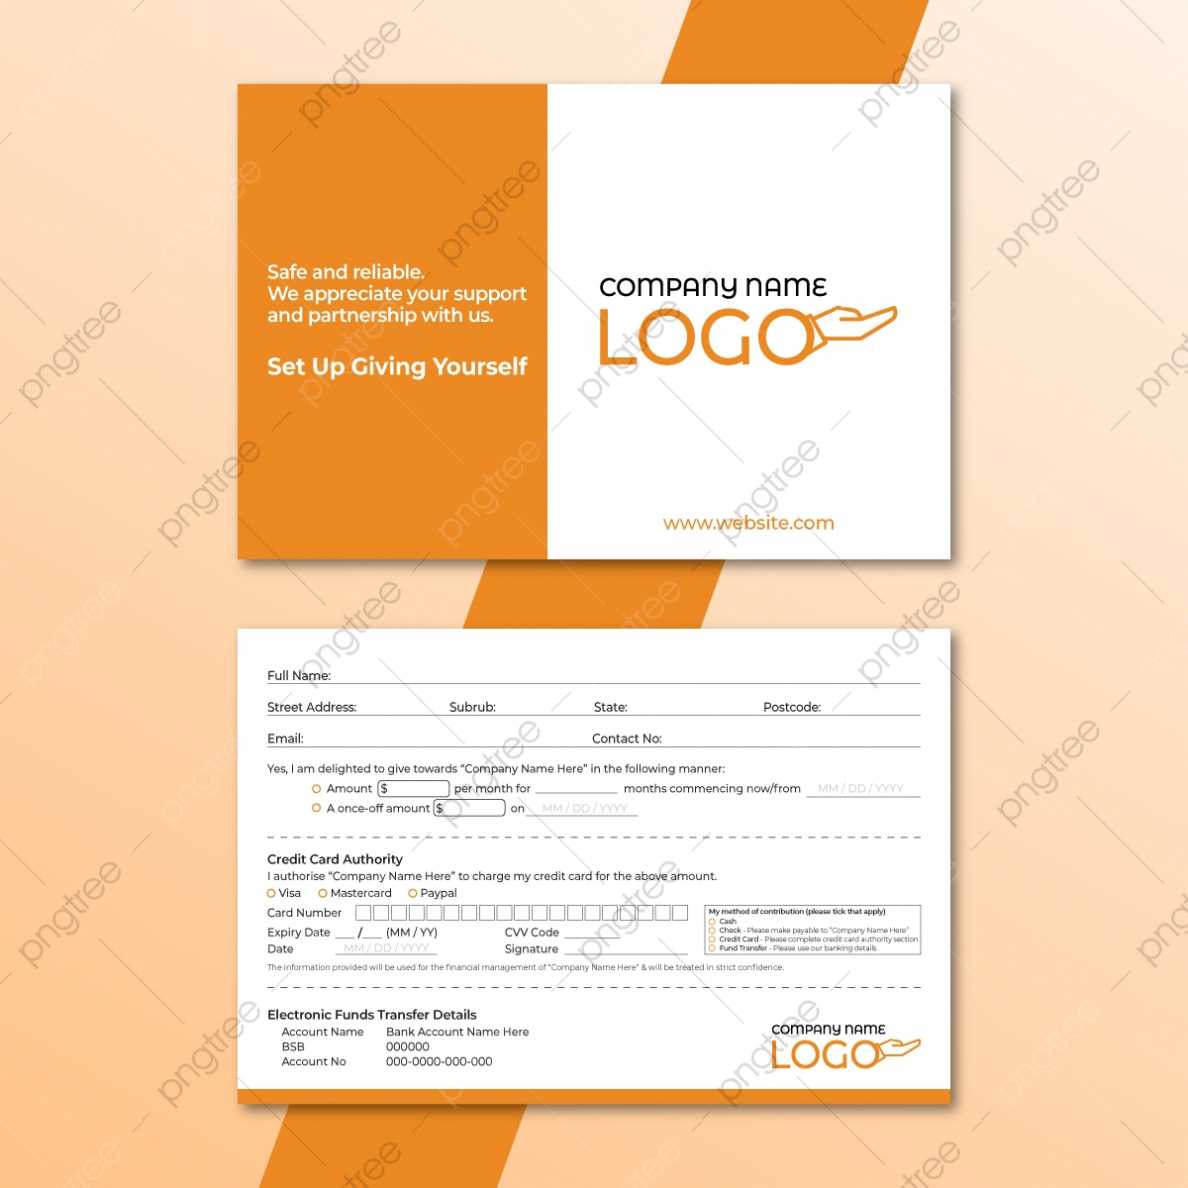 Pledge Card Png, Vector, Psd, And Clipart With Transparent with regard to Donation Cards Template